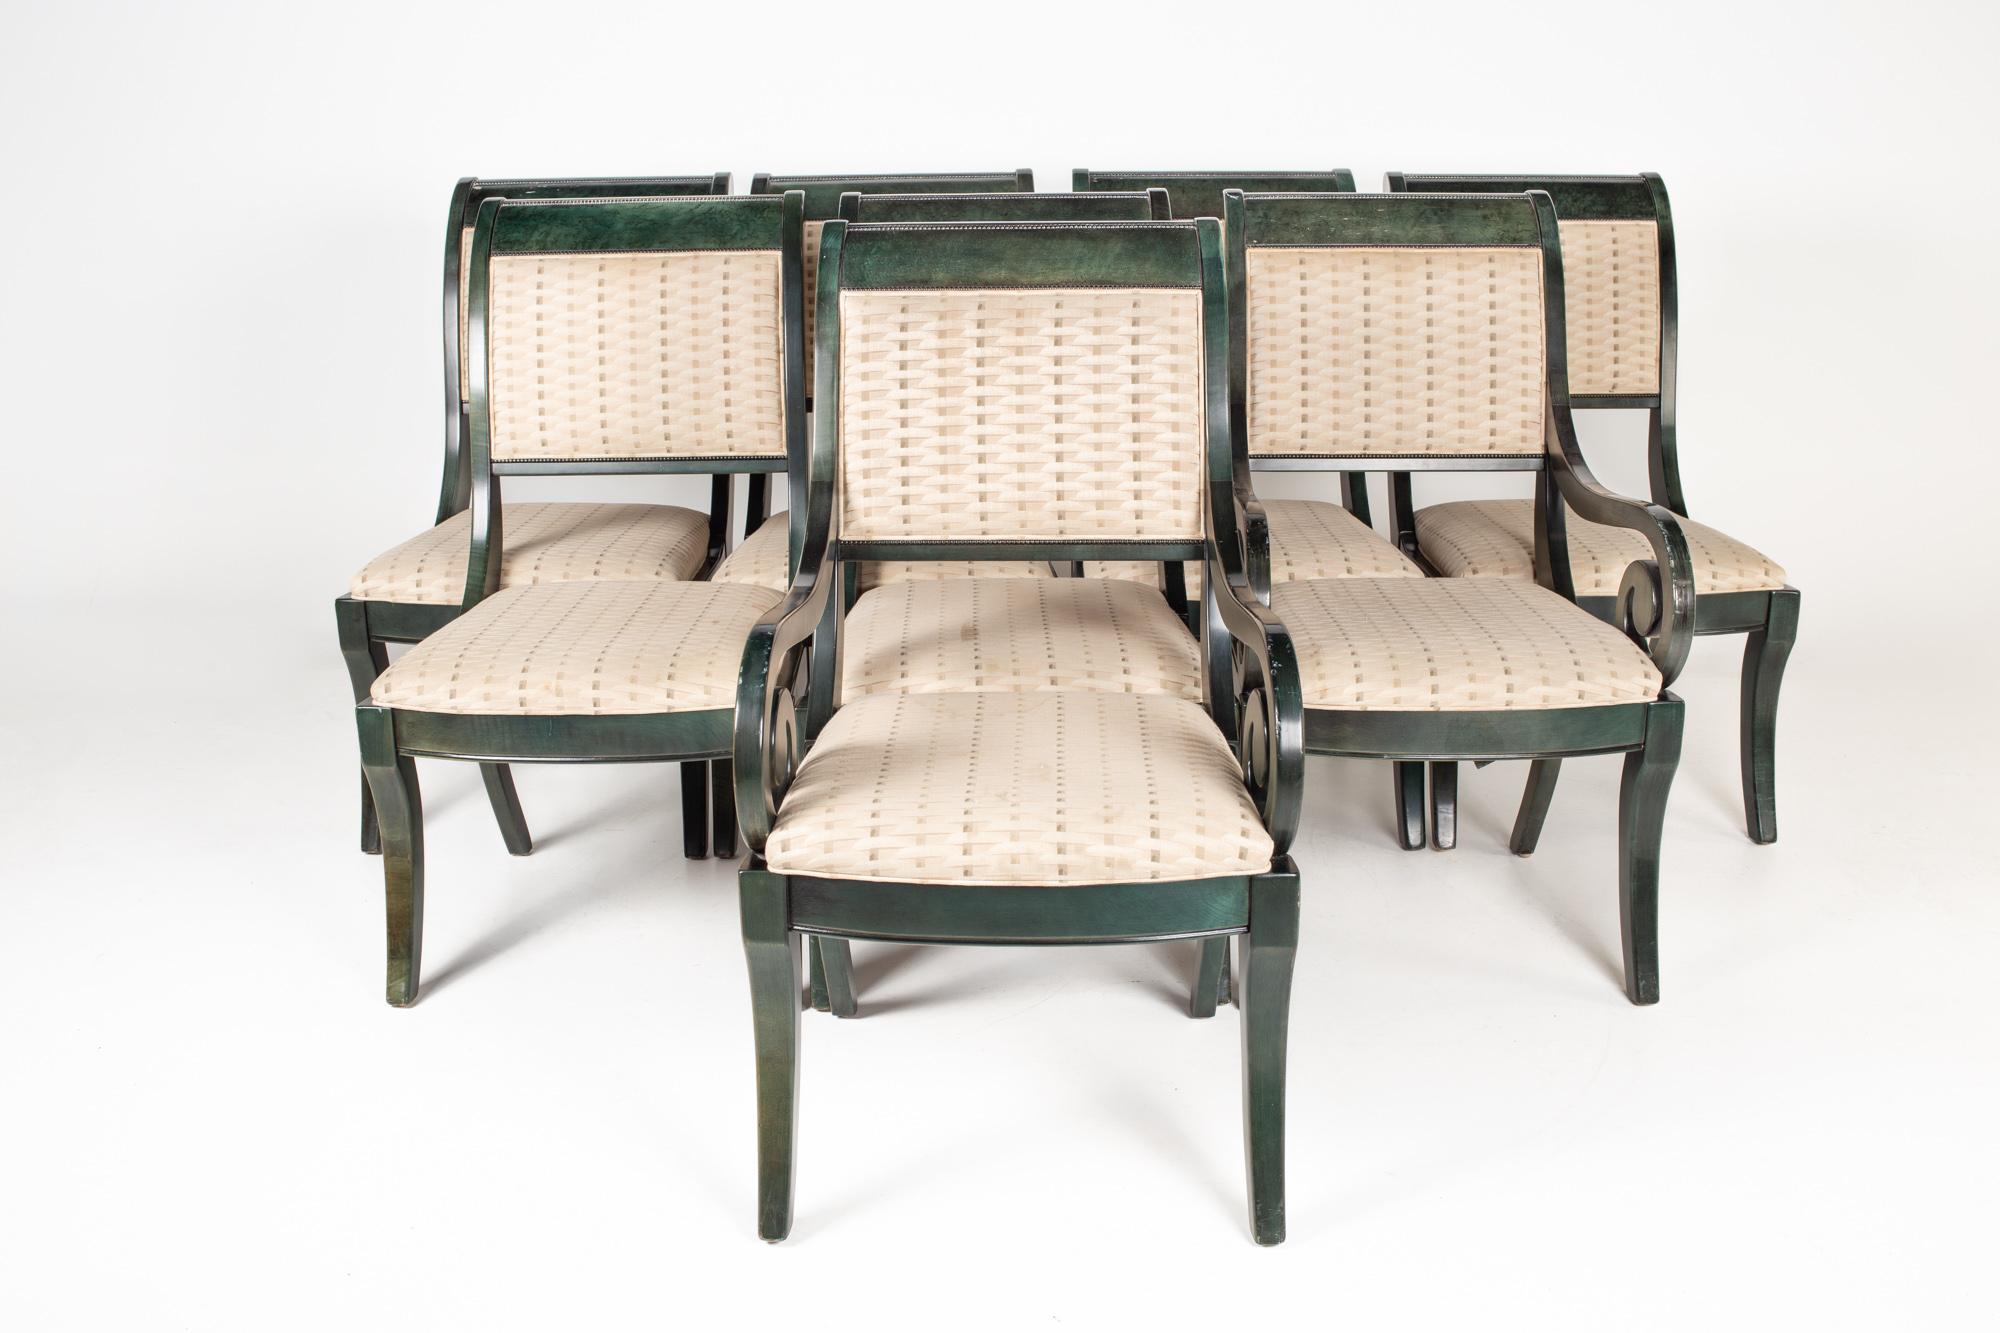 Mid century green lacquer dining chairs with beige seat cushions - set of 8

Each chair measures: 21 wide x 28 deep x 38 inches high, with a seat height of 18 and arm height of 25 inches

Ready for new upholstery. This service is available for